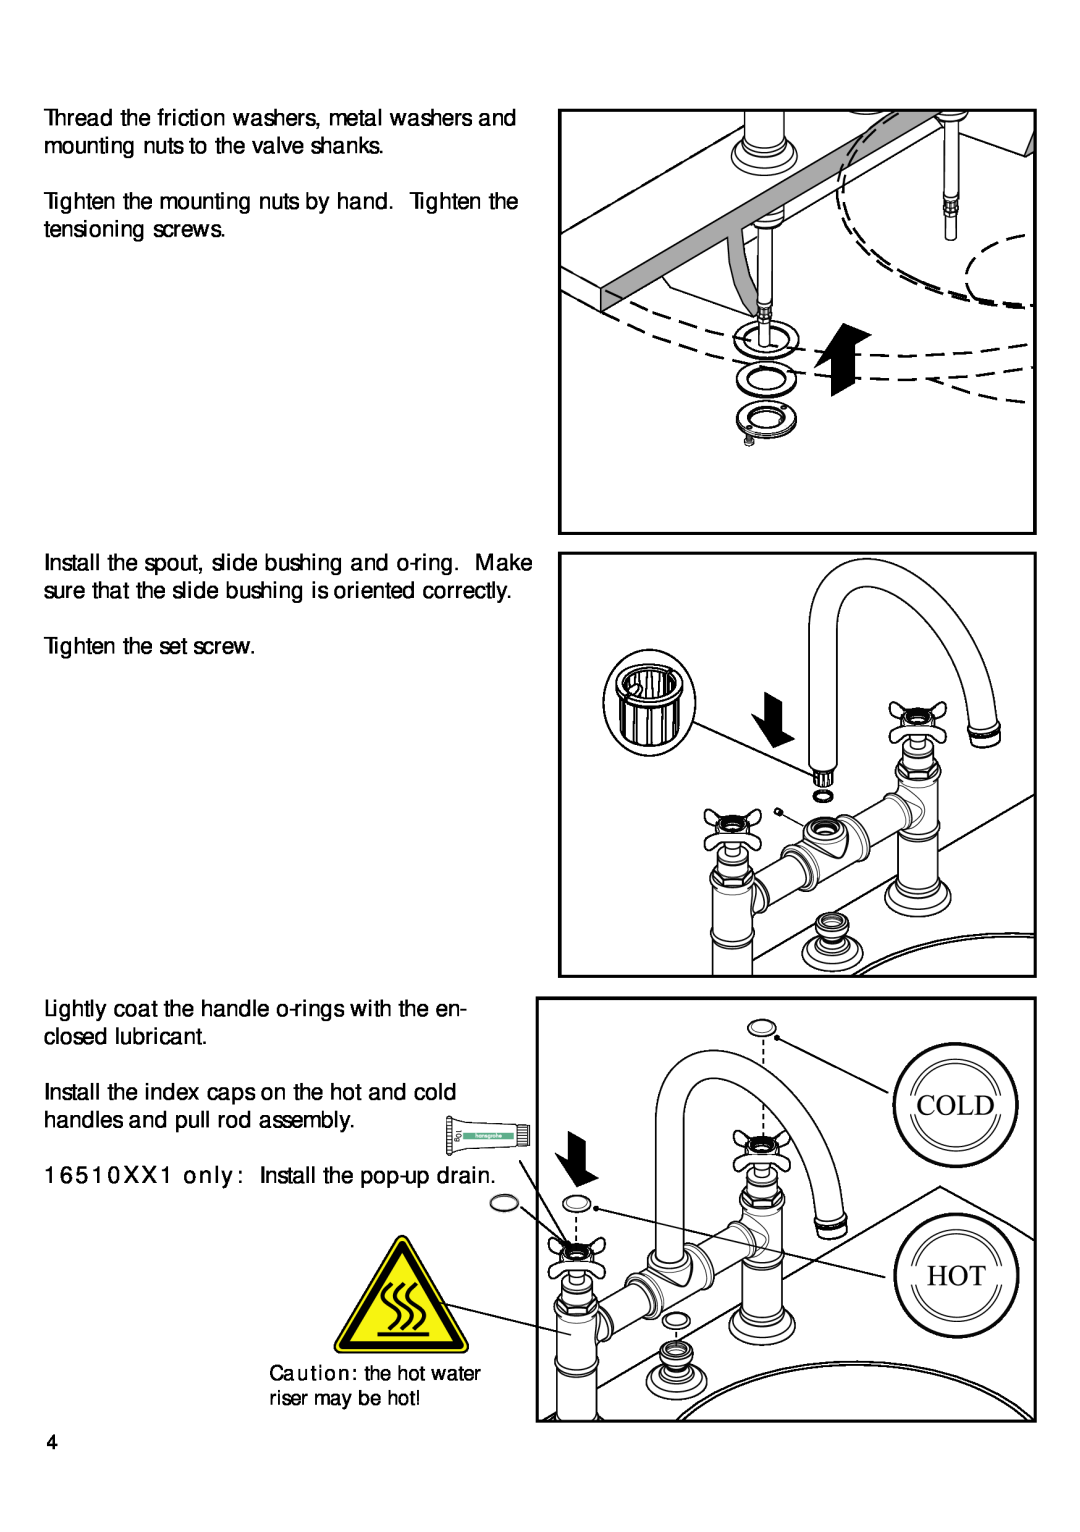 Axor 16510XX1, 16803XX1 installation instructions Tighten the mounting nuts by hand. Tighten the tensioning screws 